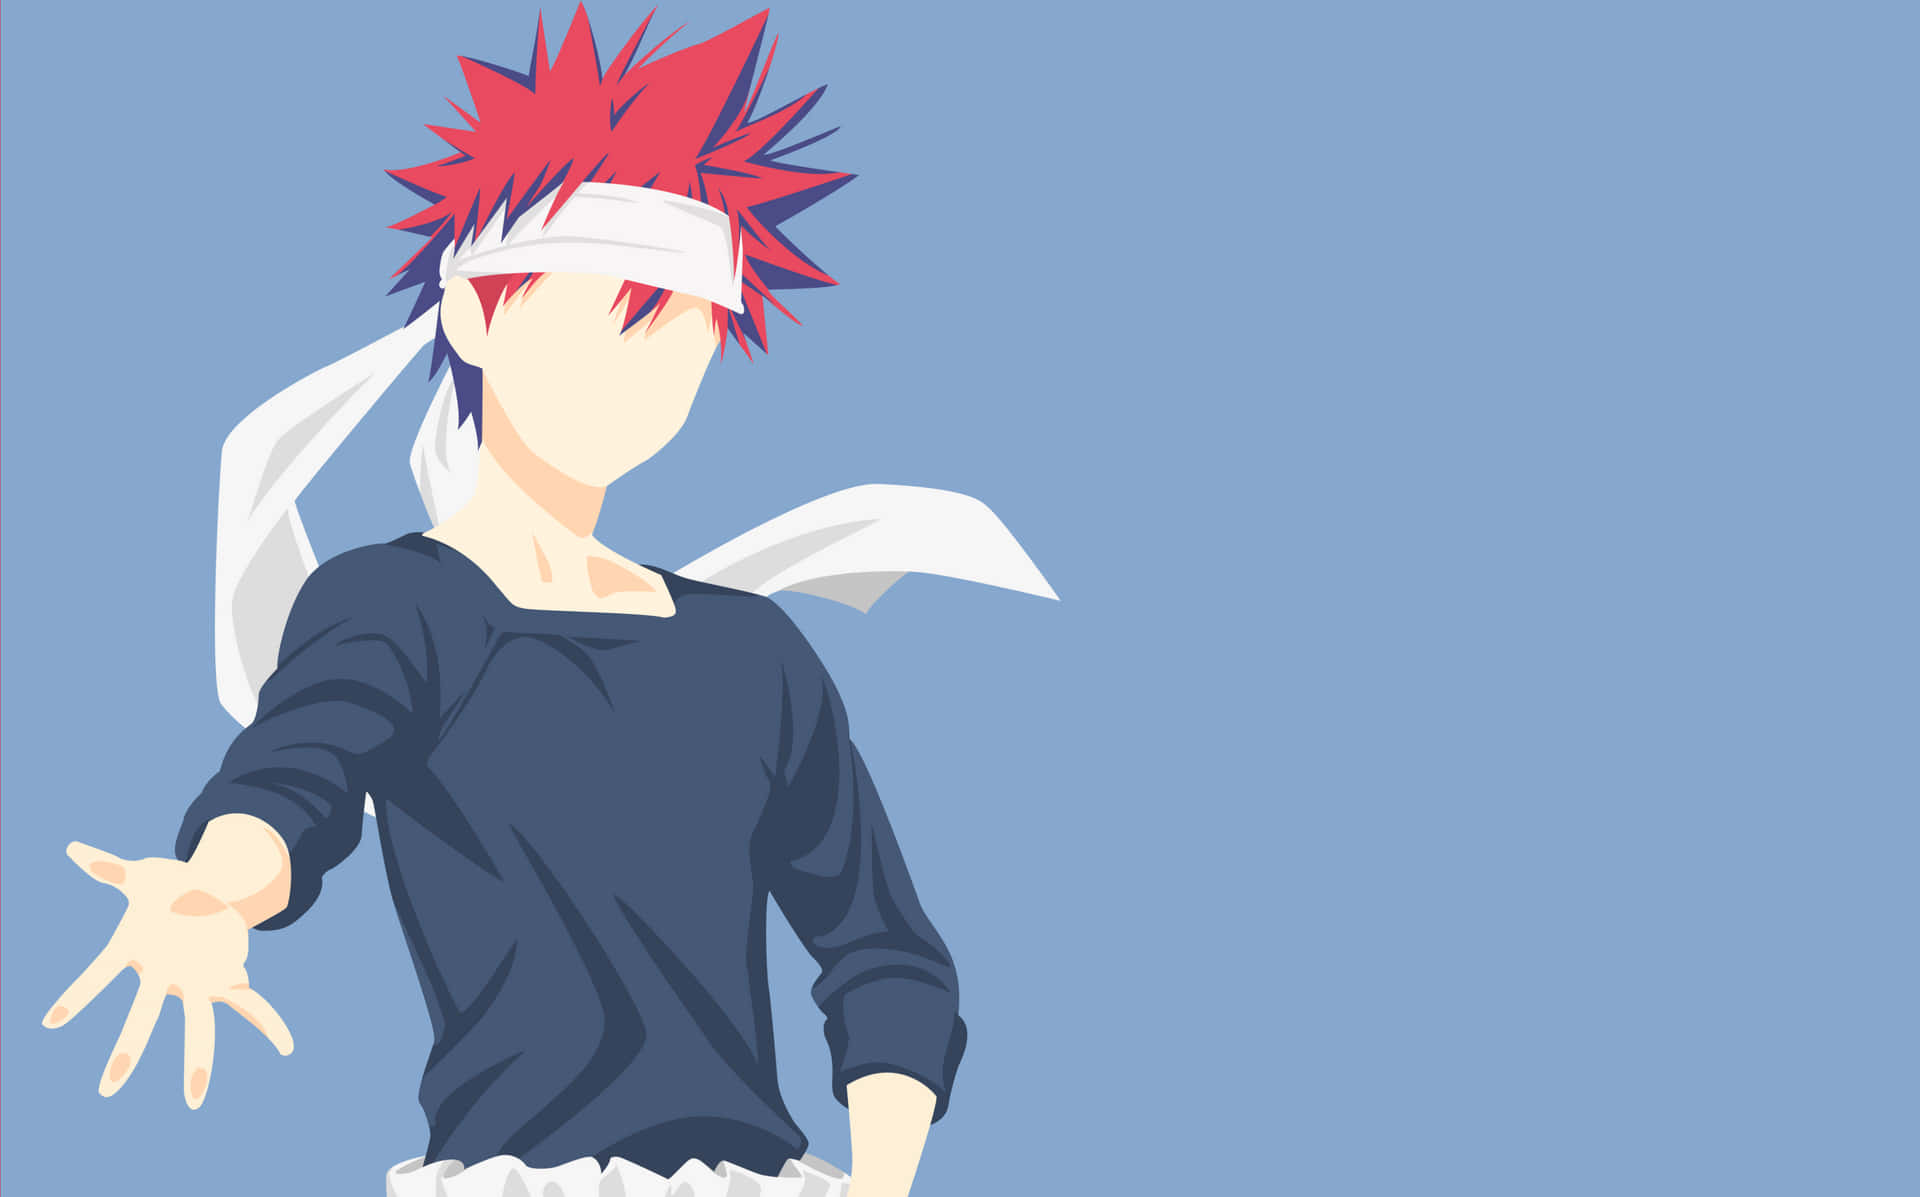 Admire the minimalistic beauty of this anime character. Wallpaper